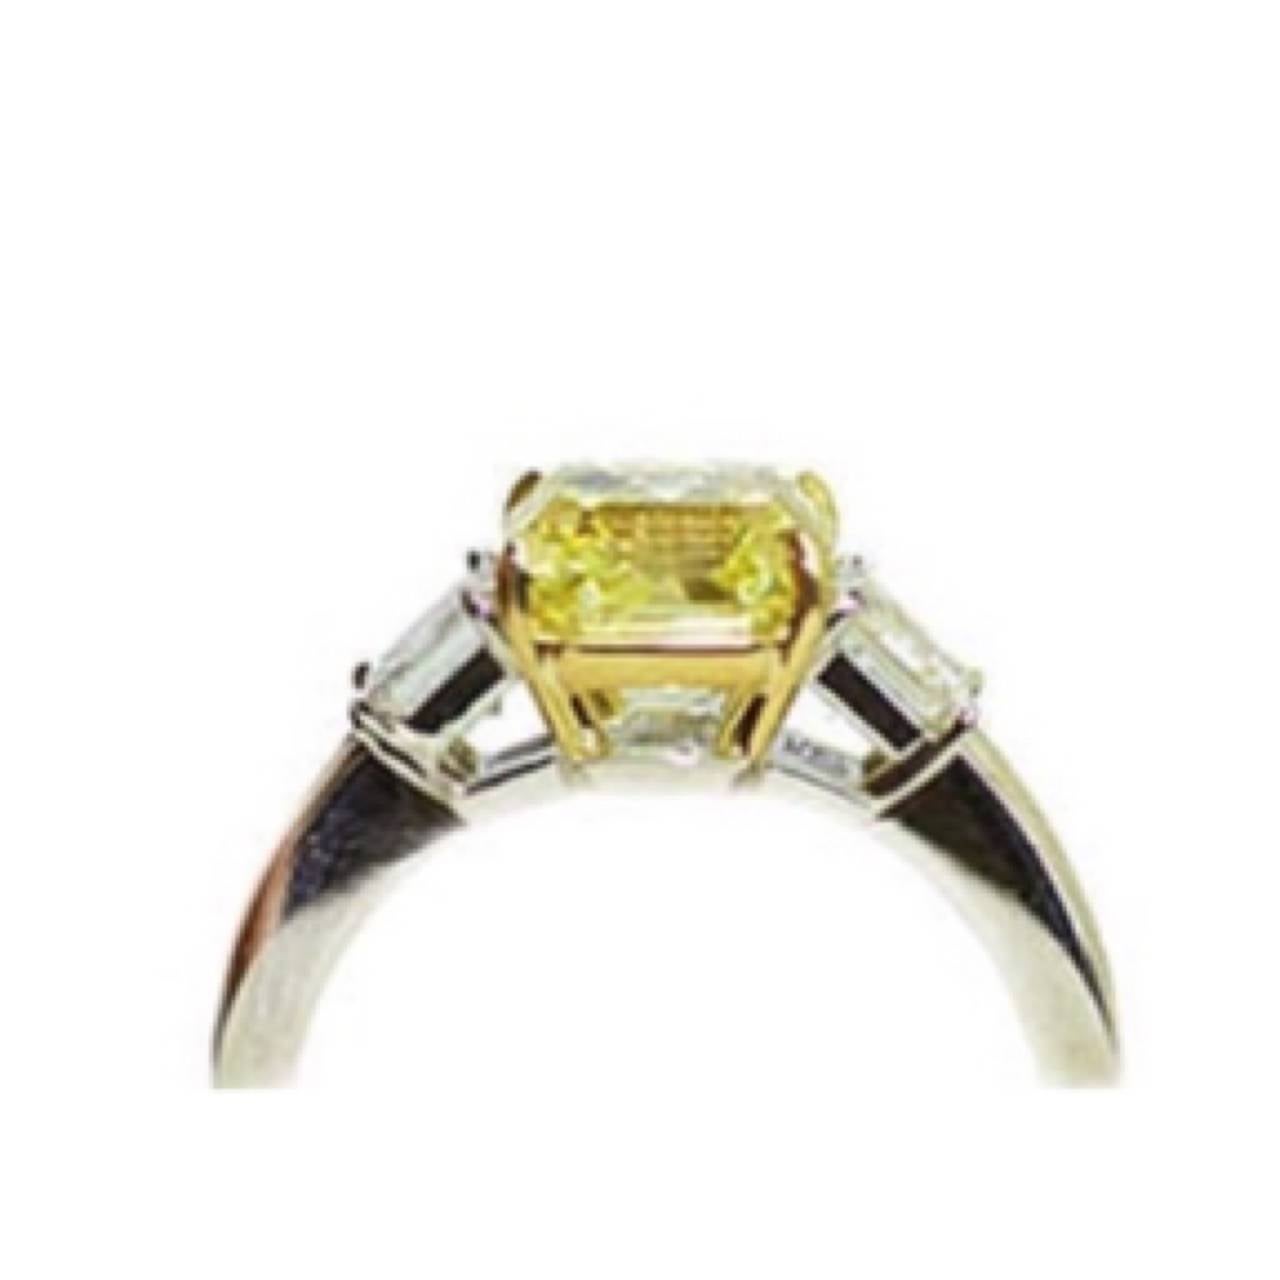 3.03ct Fancy intense yellow Asscher cut yellow diamond sits in the center of this ring. The clarity is vs1 and cut is exceptional. The center stone has a GIA certificate. 

The two white Asscher Cut diamonds are E color vs1 and total .78ct